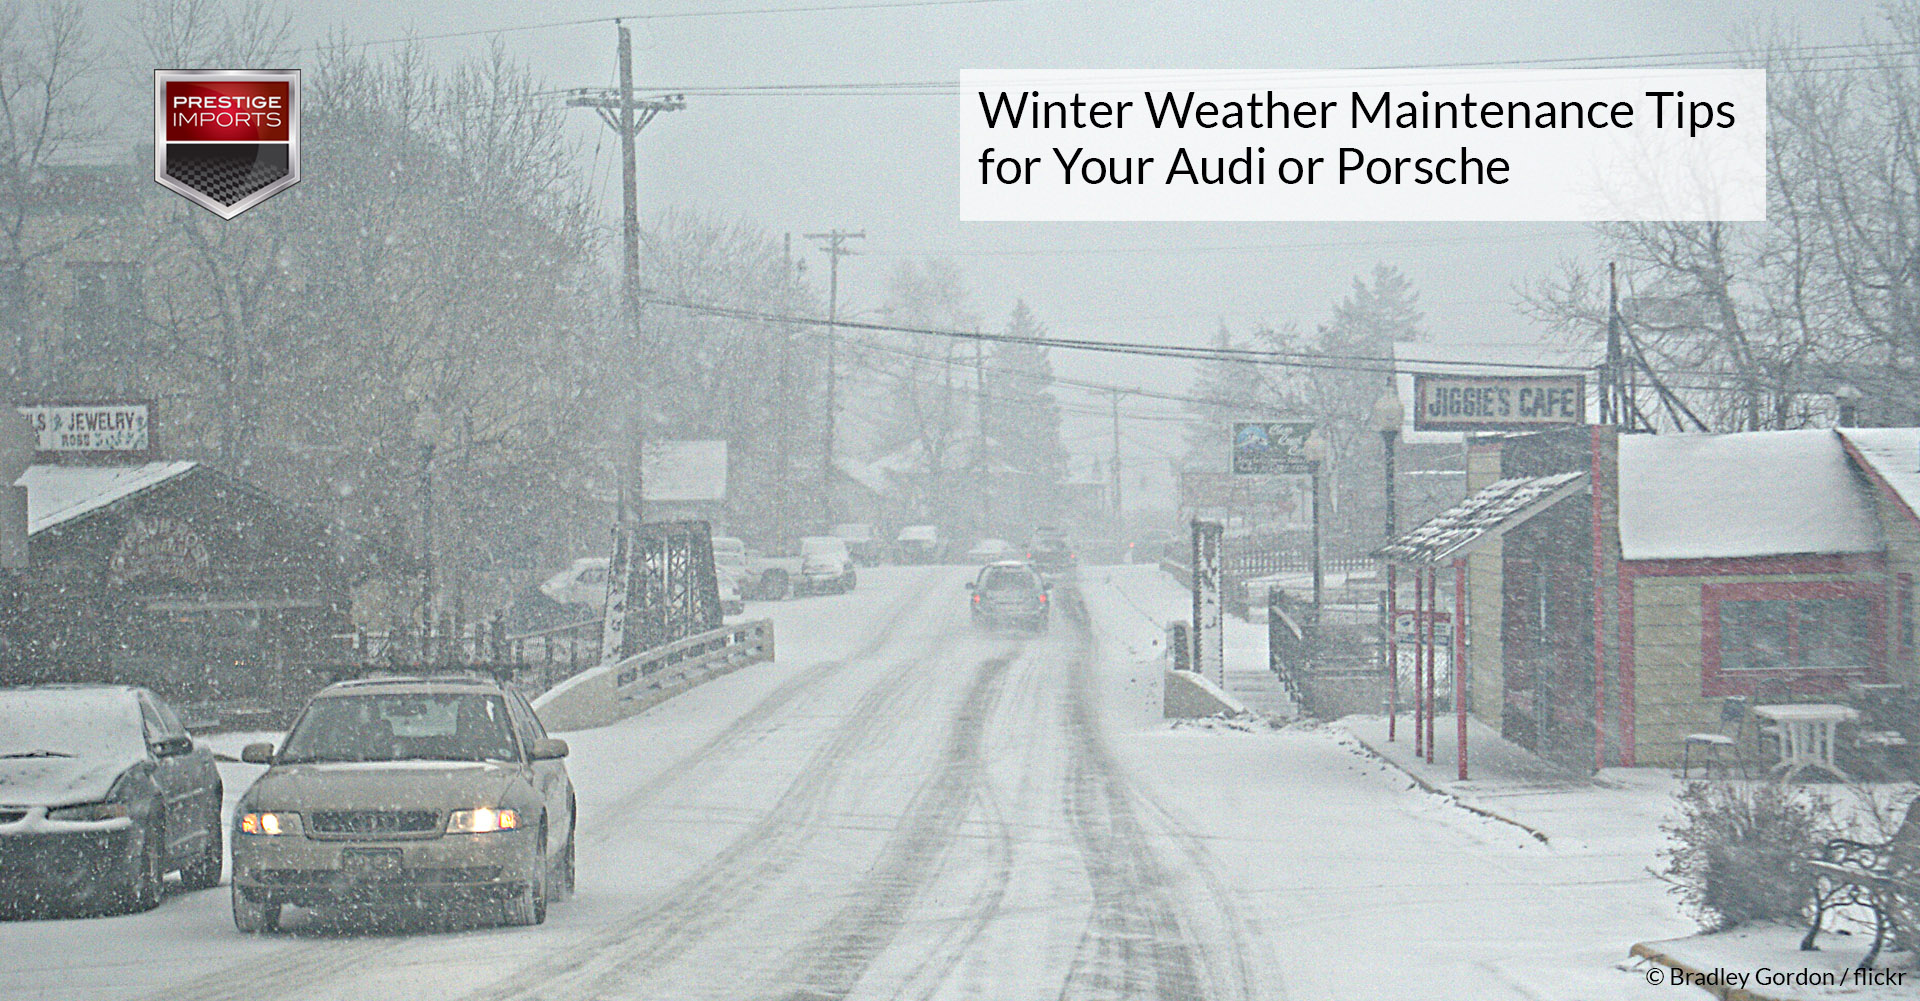 Winter Weather Maintenance Tips for Your Audi or Porsche